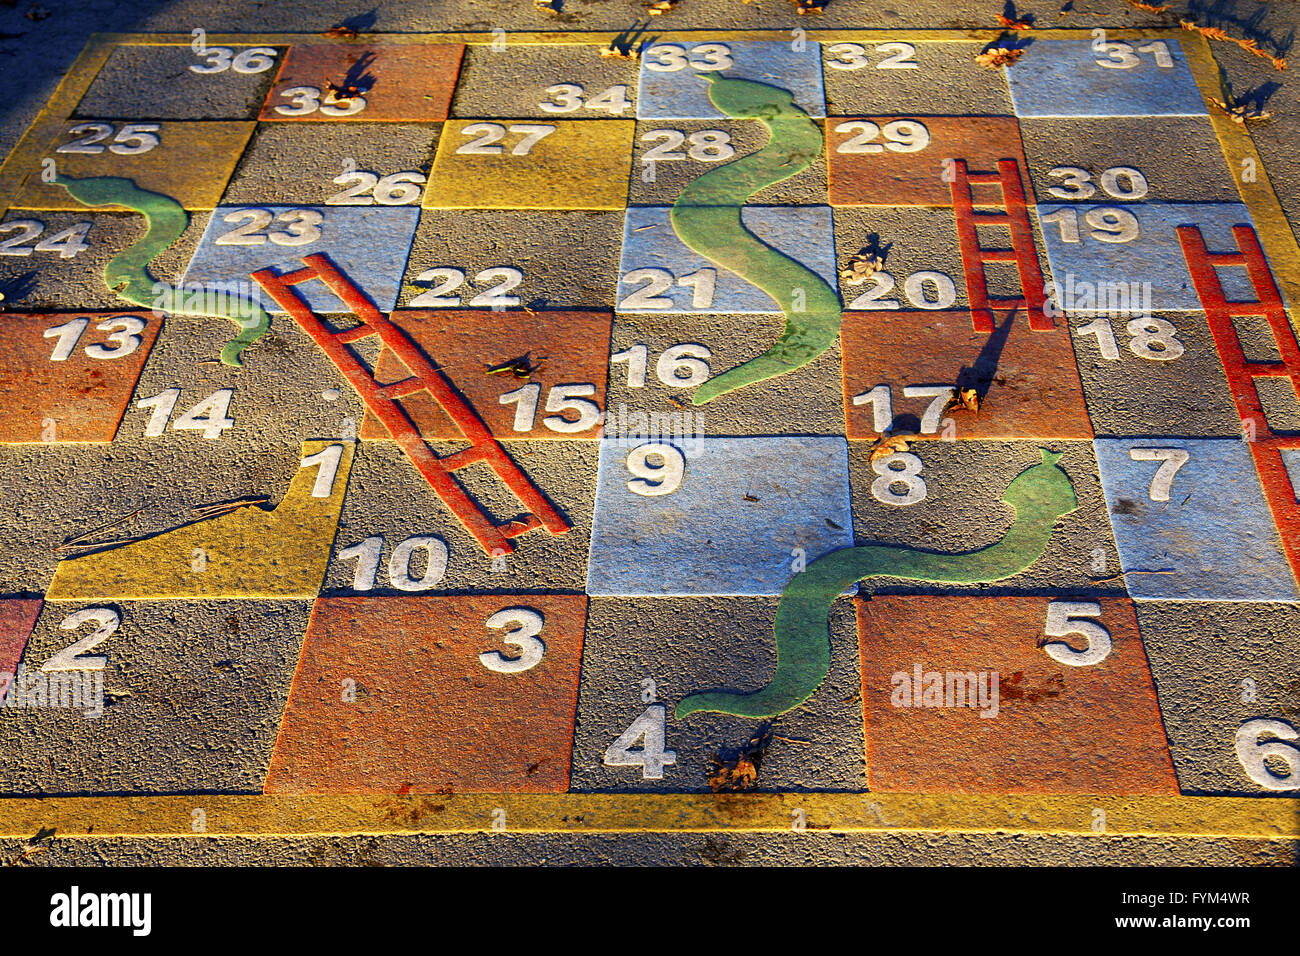 Large Outdoor Snakes And Ladders Game Stock Photo 103090451 Alamy